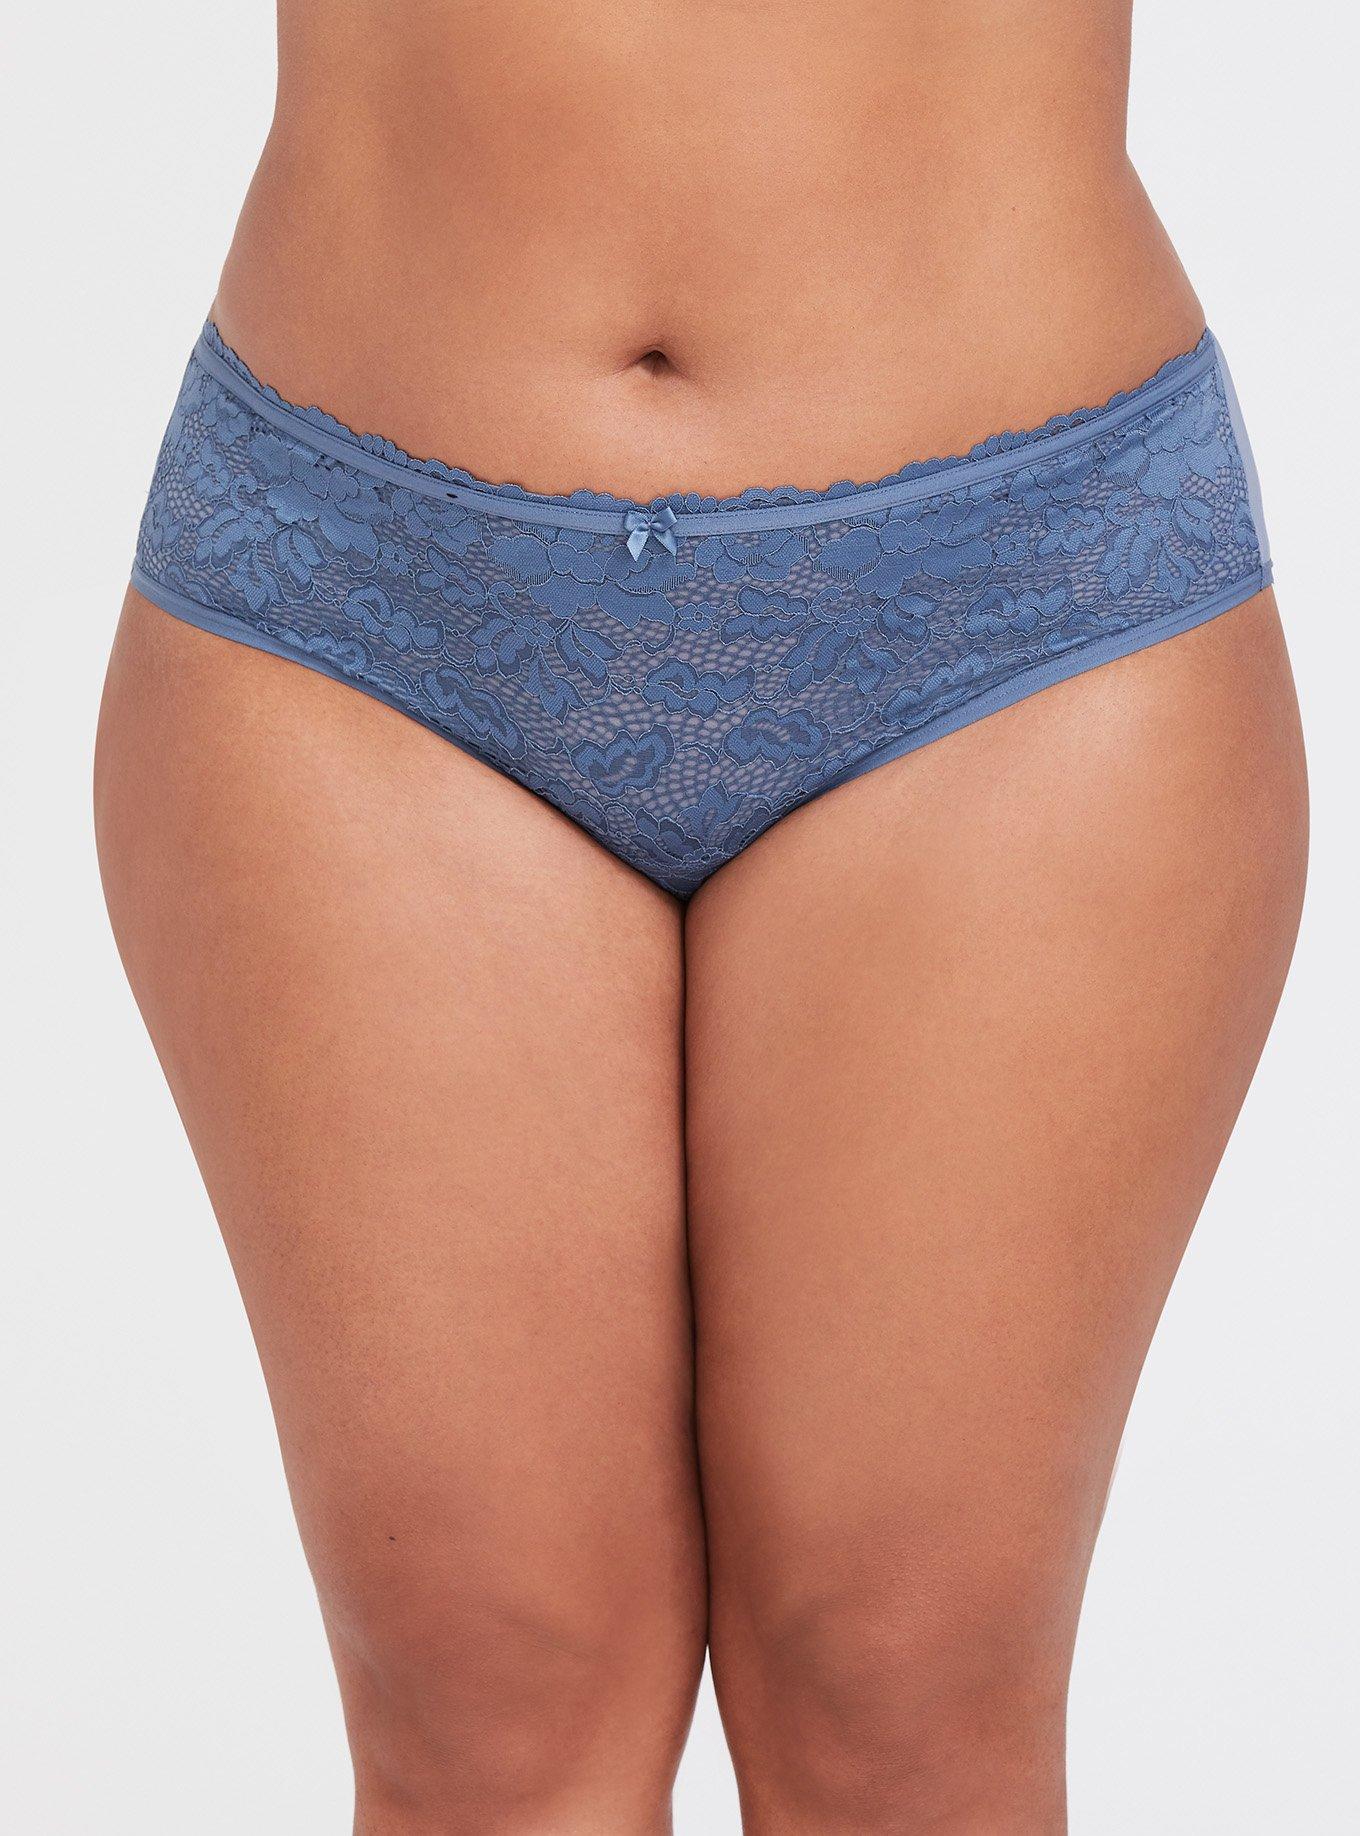 Plus Size - Simply Lace Mid-Rise Hipster Cage Back Panty - Torrid